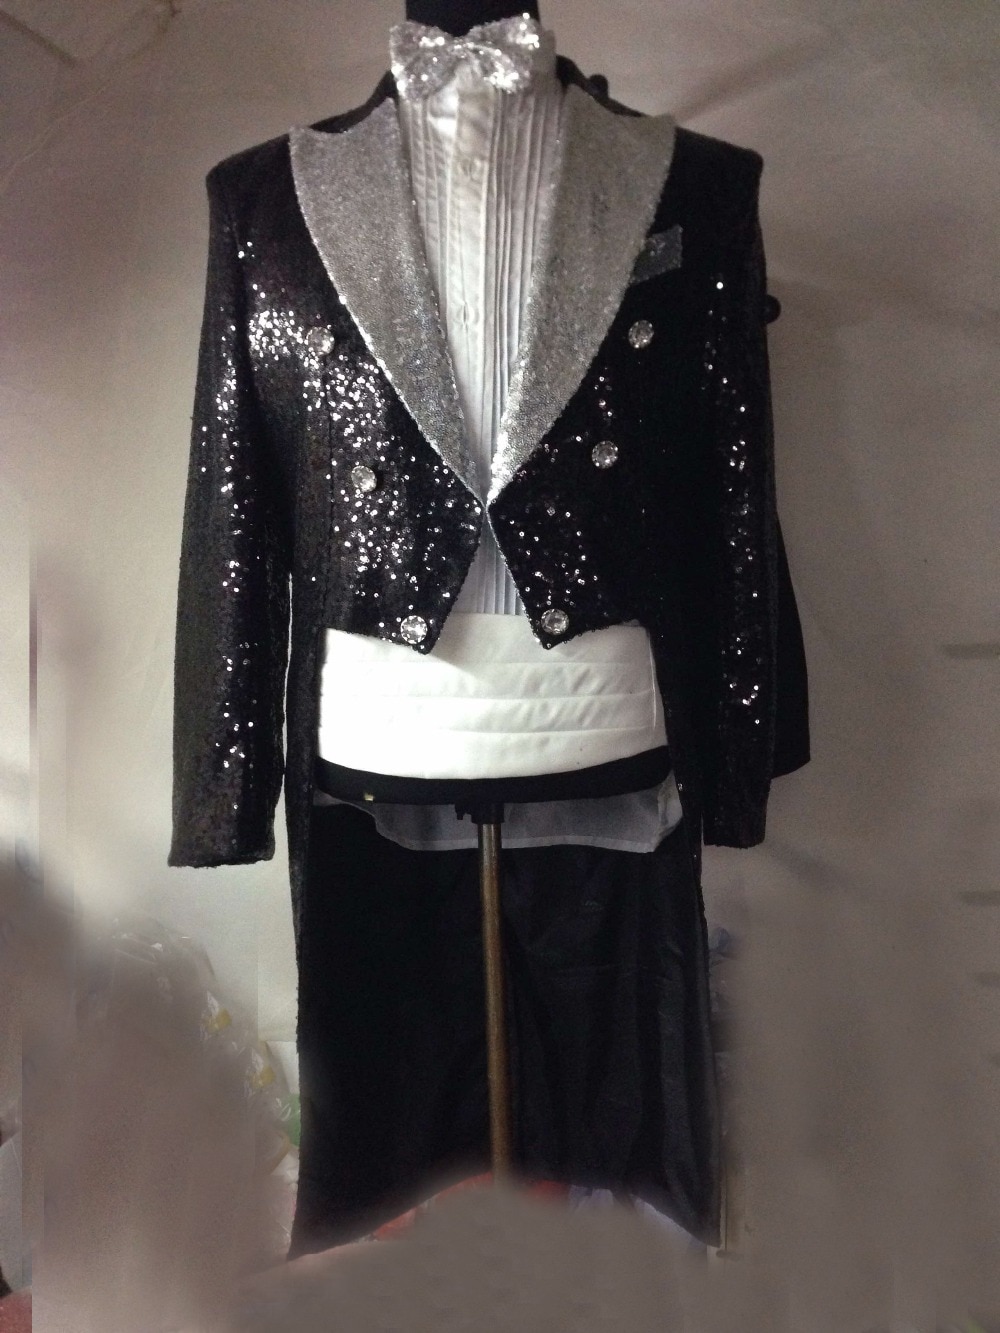   mens full sequined black swallowtail jacket νõ ǹ Į/this only jacket